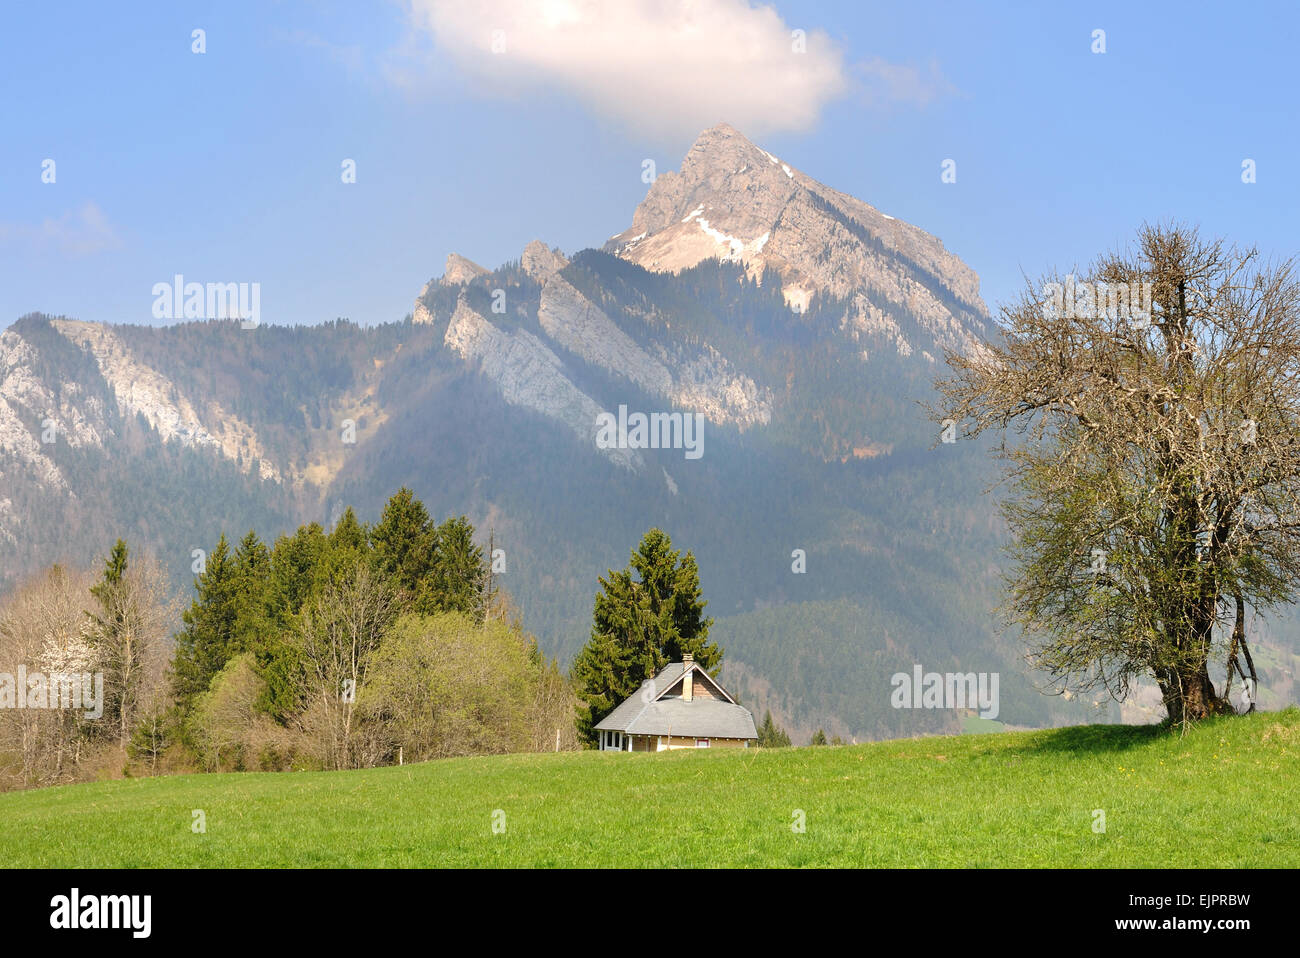 house in a greenery landscape in front of mountain Stock Photo